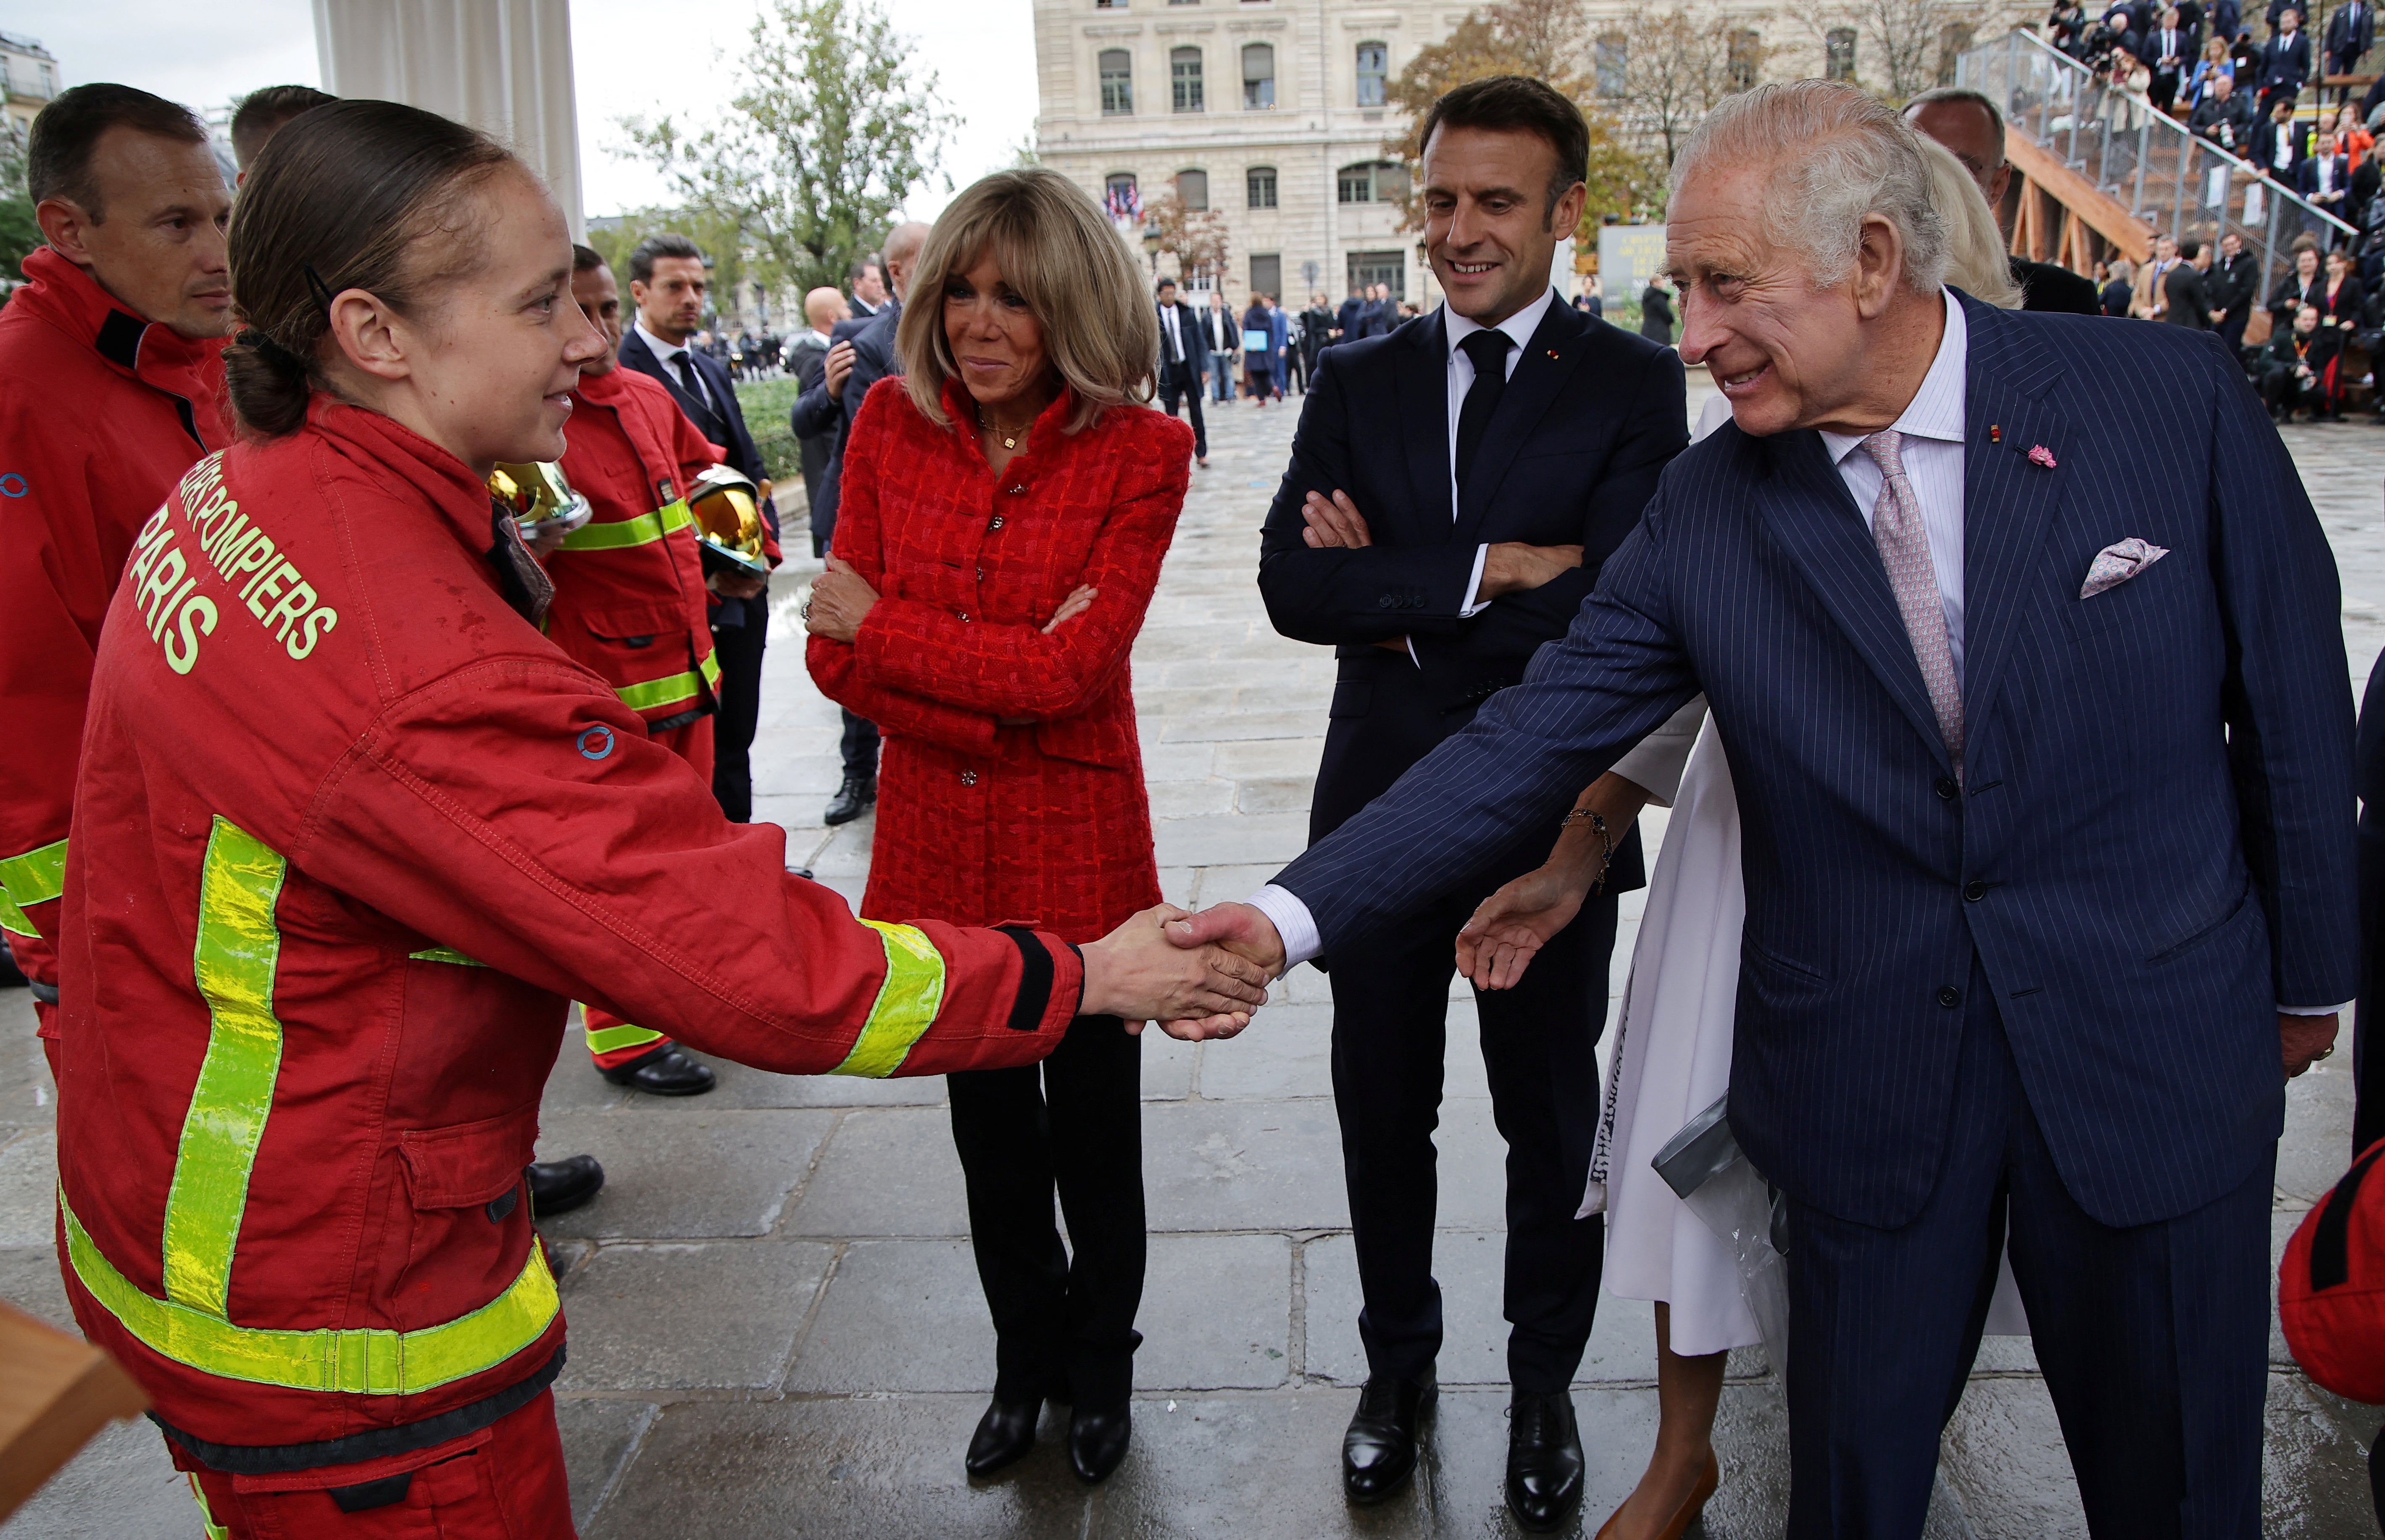 Charles, Camilla and the Macrons meet firefighters during a visit to the Notre-Dame Cathedral, which is undergoing a huge renovation after it was engulfed by a huge and devastating fire in 2019